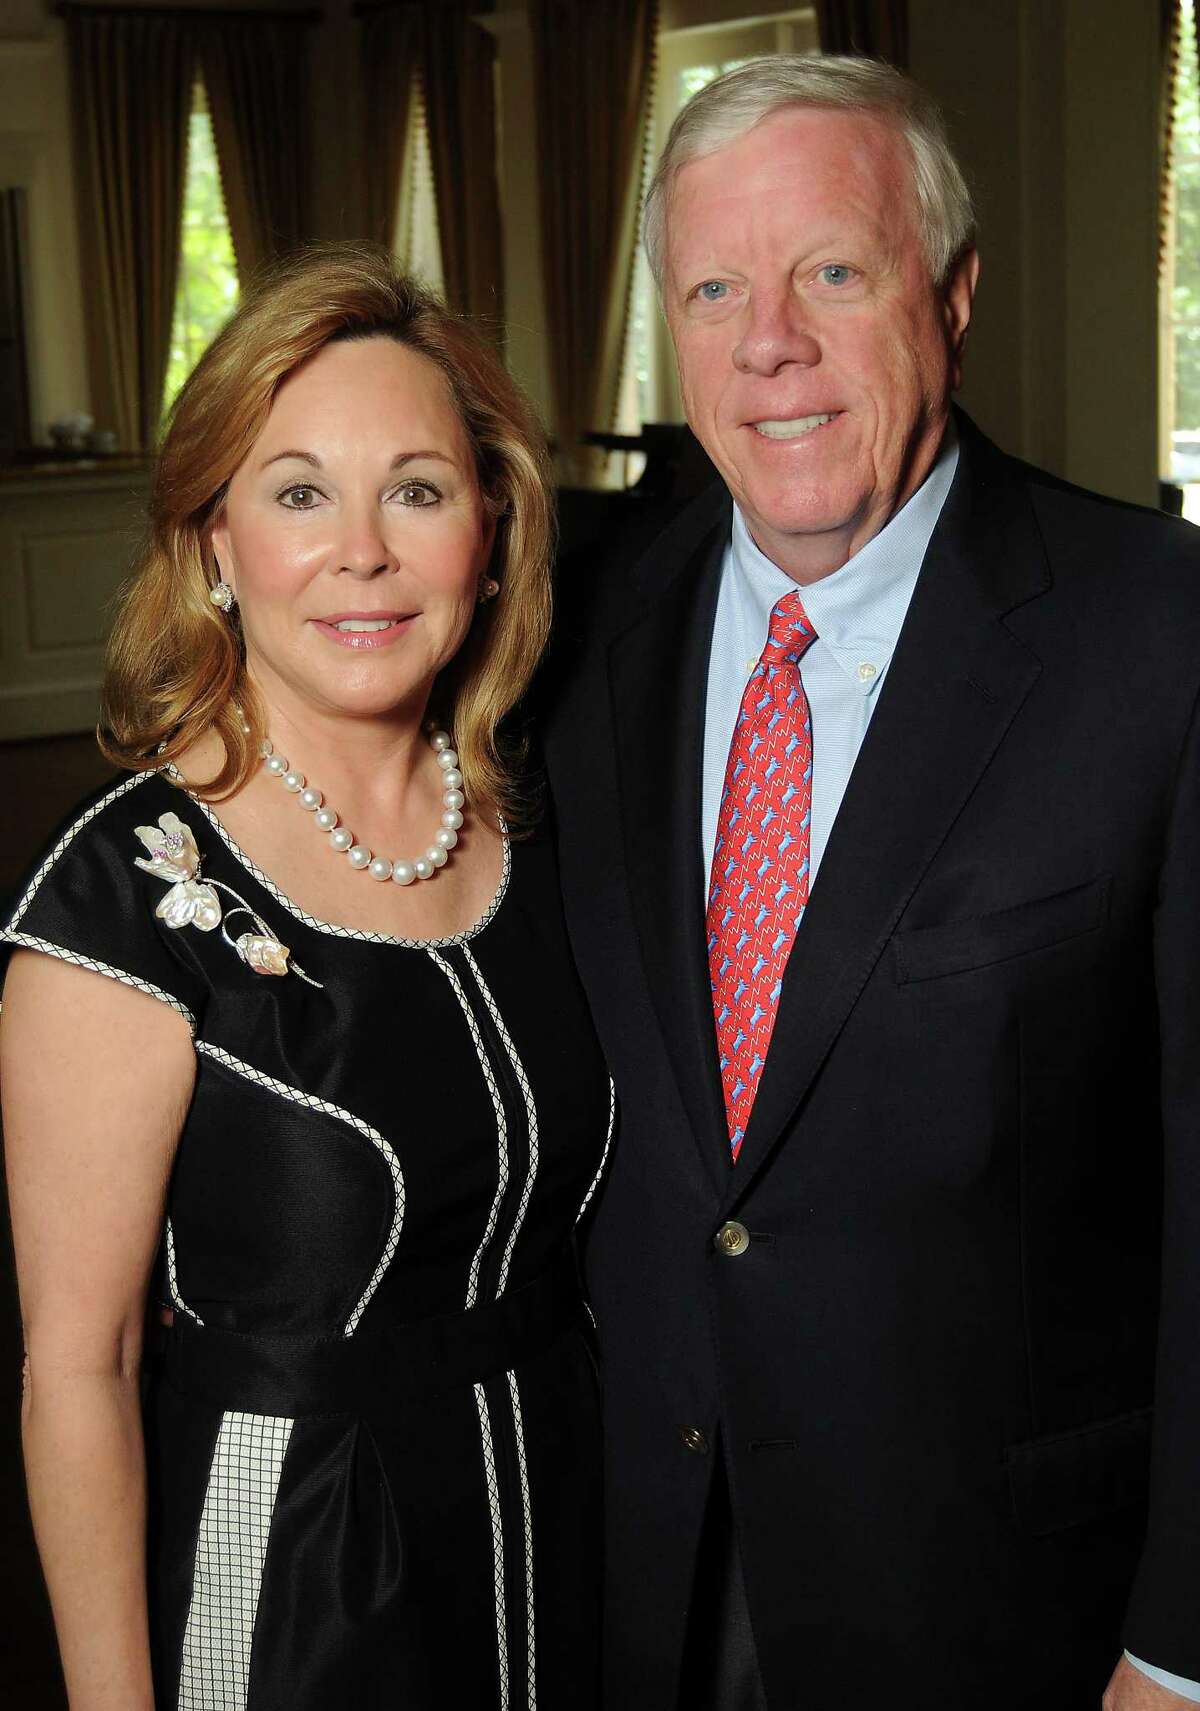 Nancy and Rich Kinder at the Houston Center for Contemporary Craft's luncheon at the River Oaks Country Club Tuesday May 07, 2013.(Dave Rossman photo)